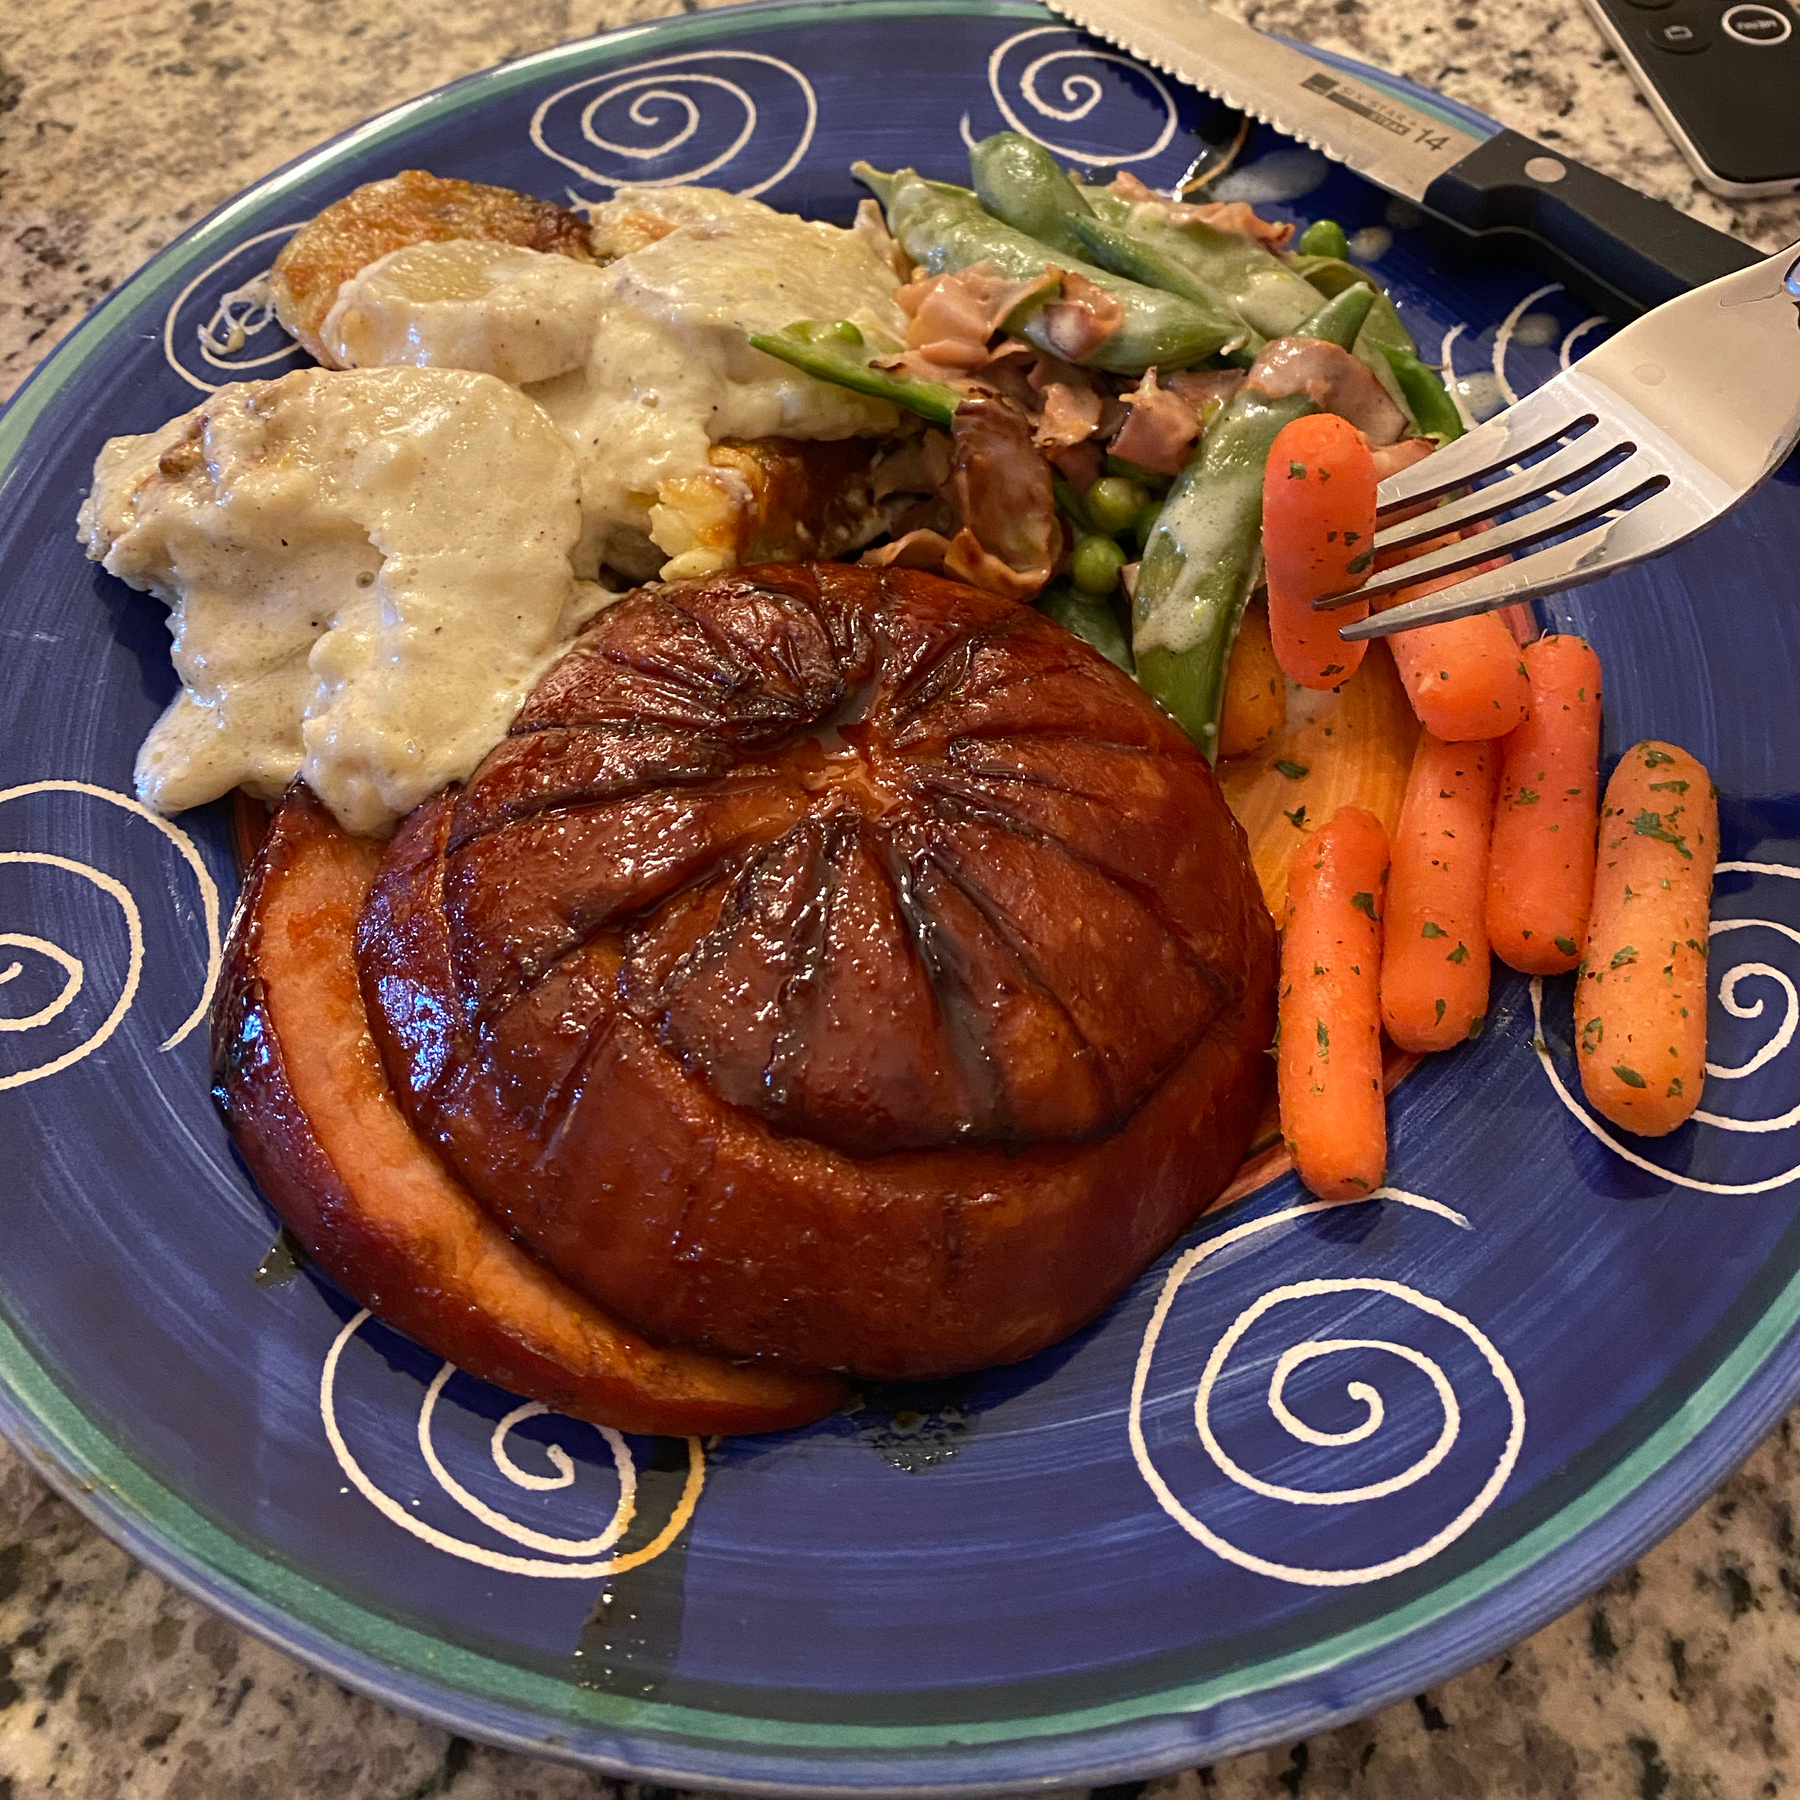 A plate of food including mashed potatoes and glazed spiral ham.